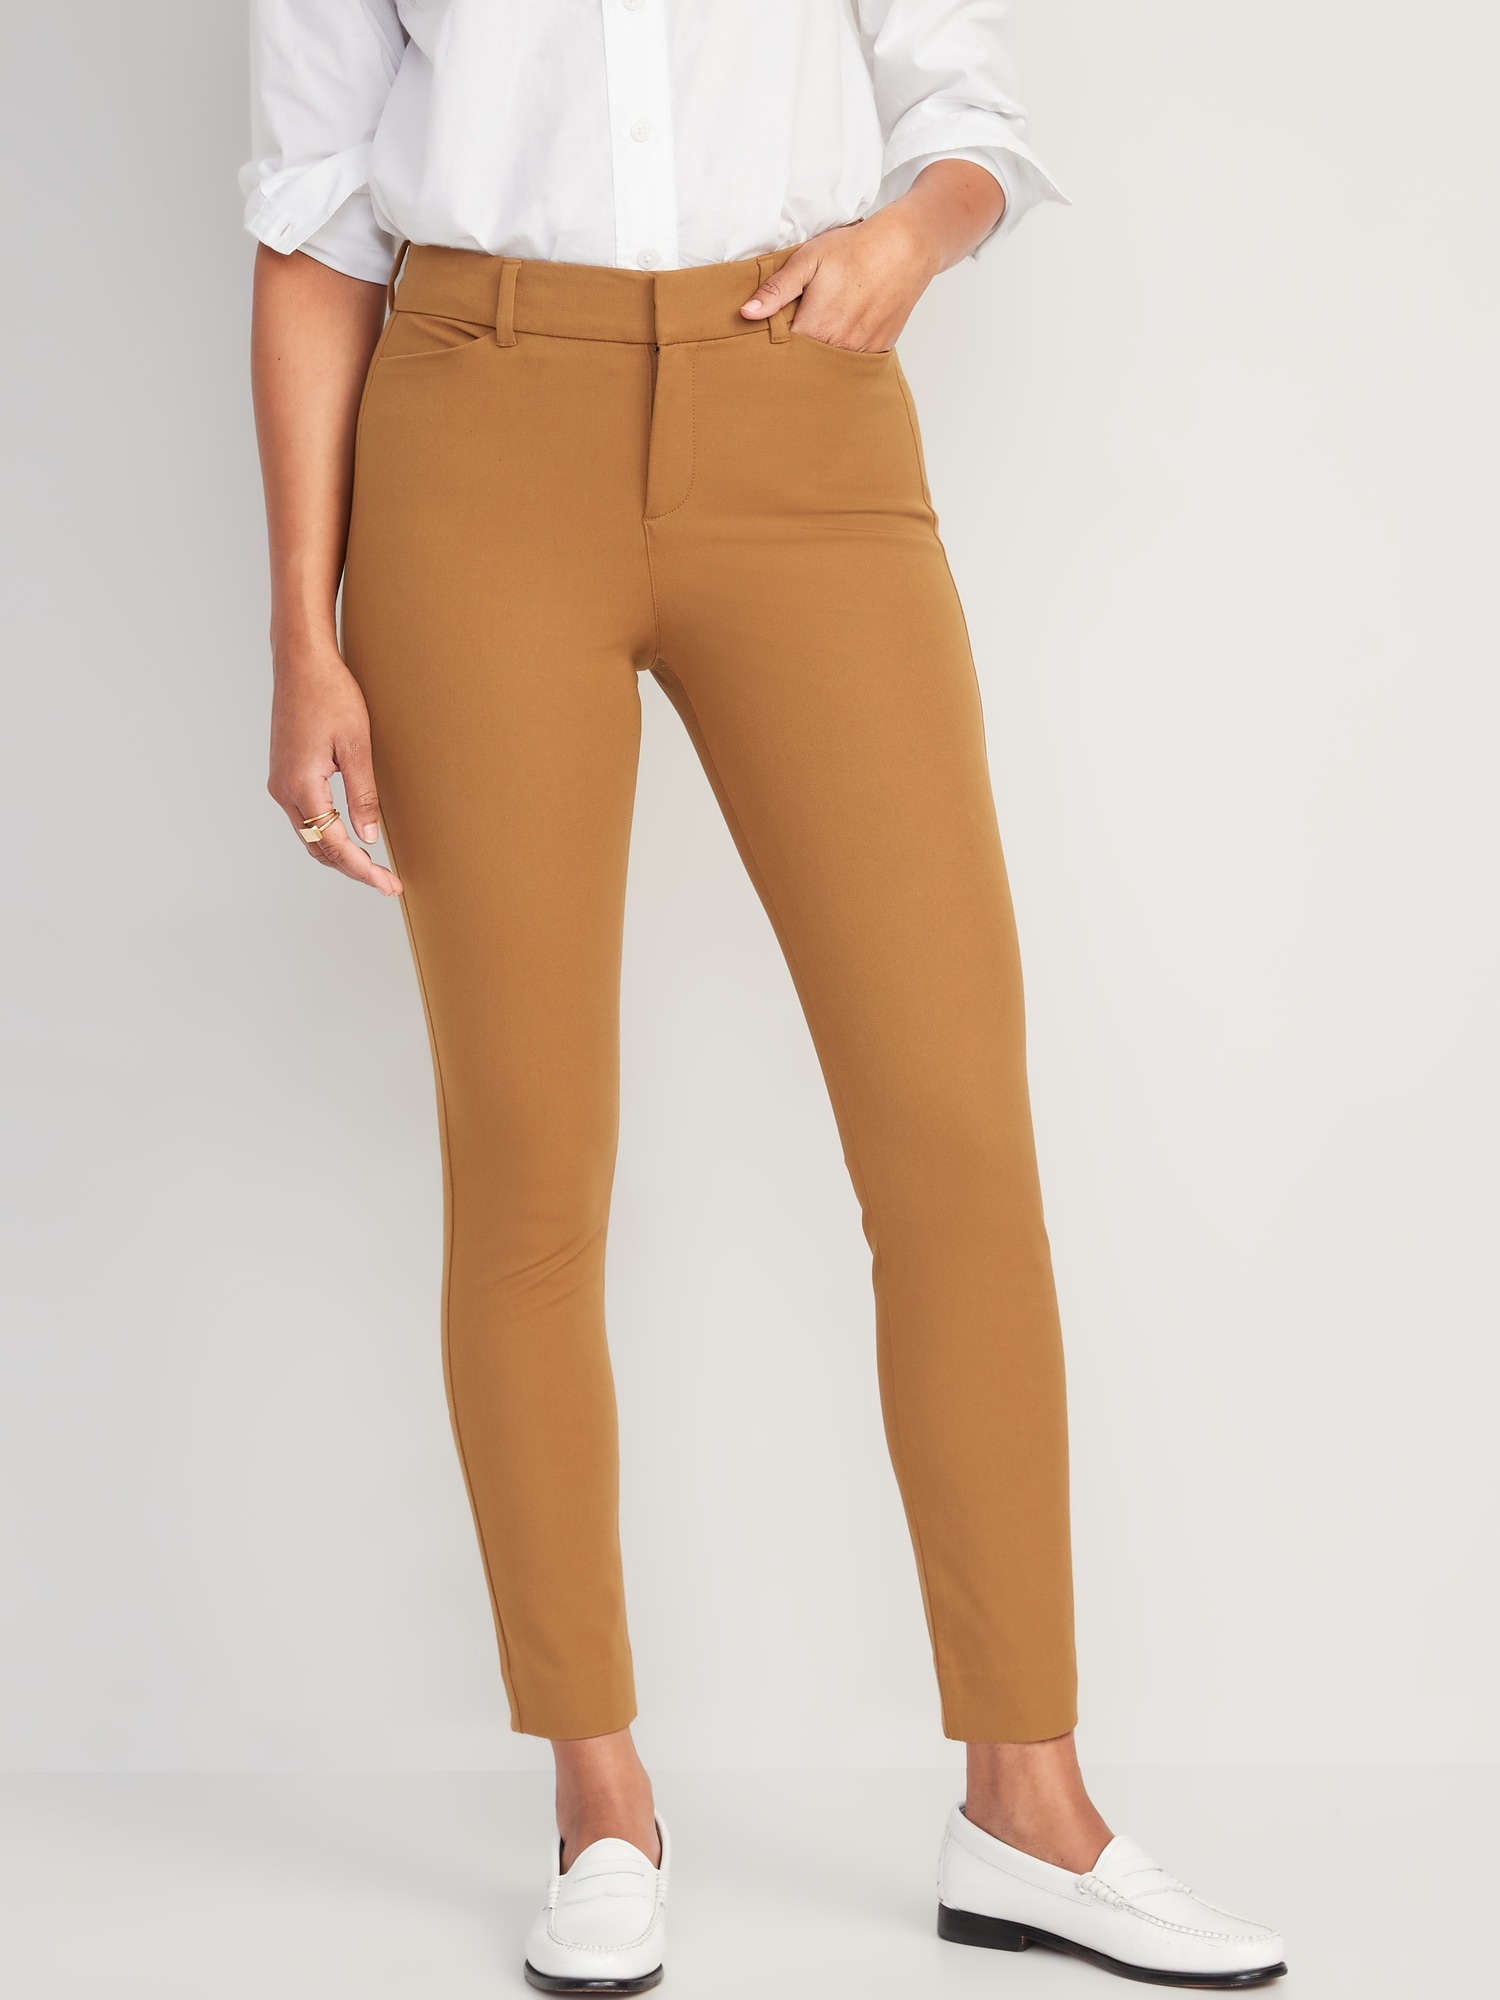 Old Navy - High-Waisted Pixie Skinny Ankle Pants for Women brown